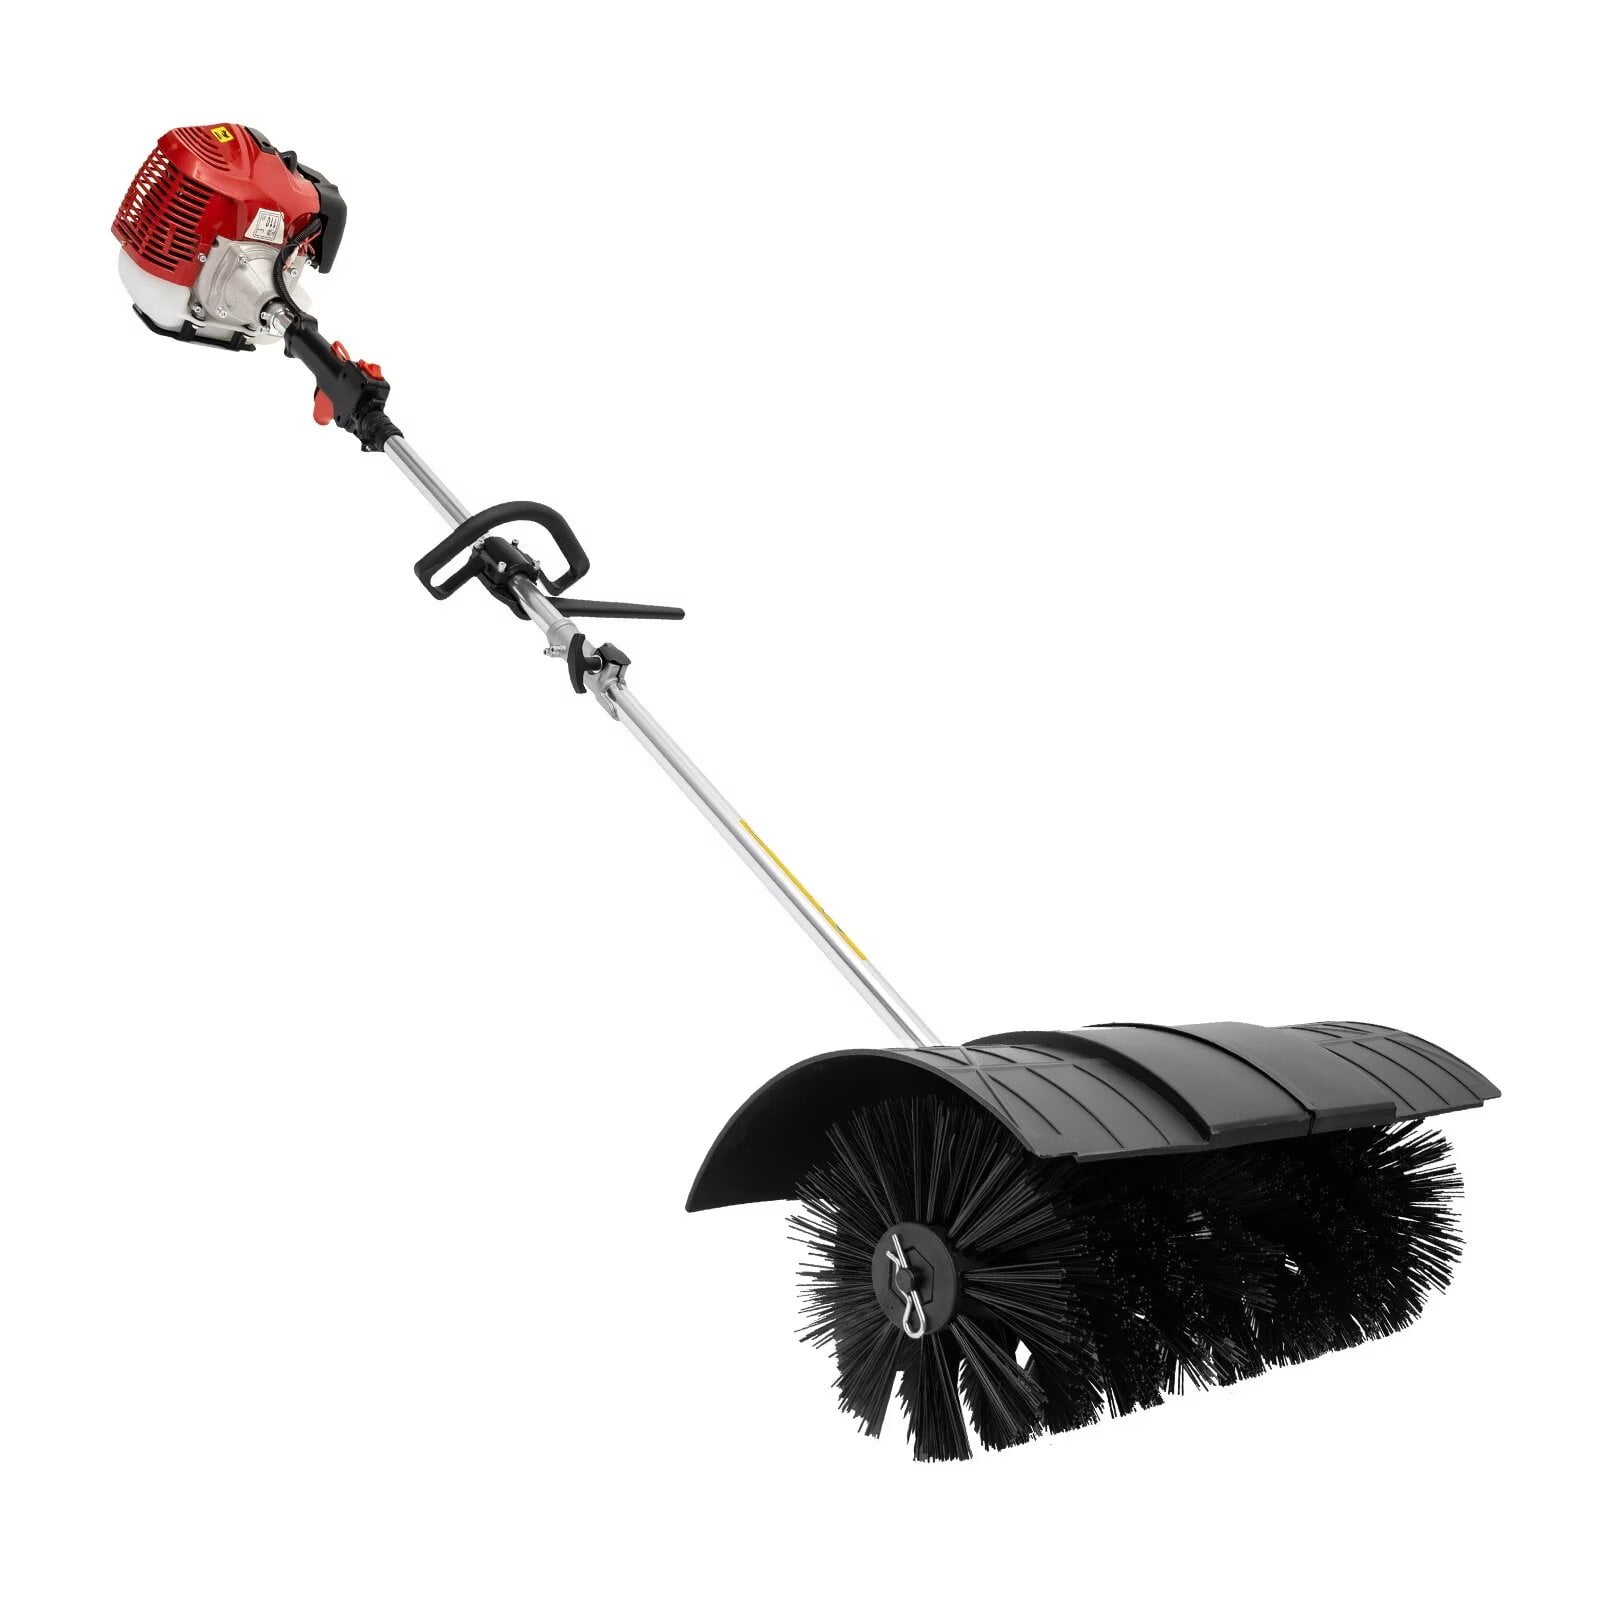 ZPL 52CC 2.4HP 1700W 7000RPM Gas Power Handheld Snow Sweeper Snow  Shovel,24x9 Gasoline Snow Broom Snow Cleaner Snow Joe Thrower for Lawn  Care